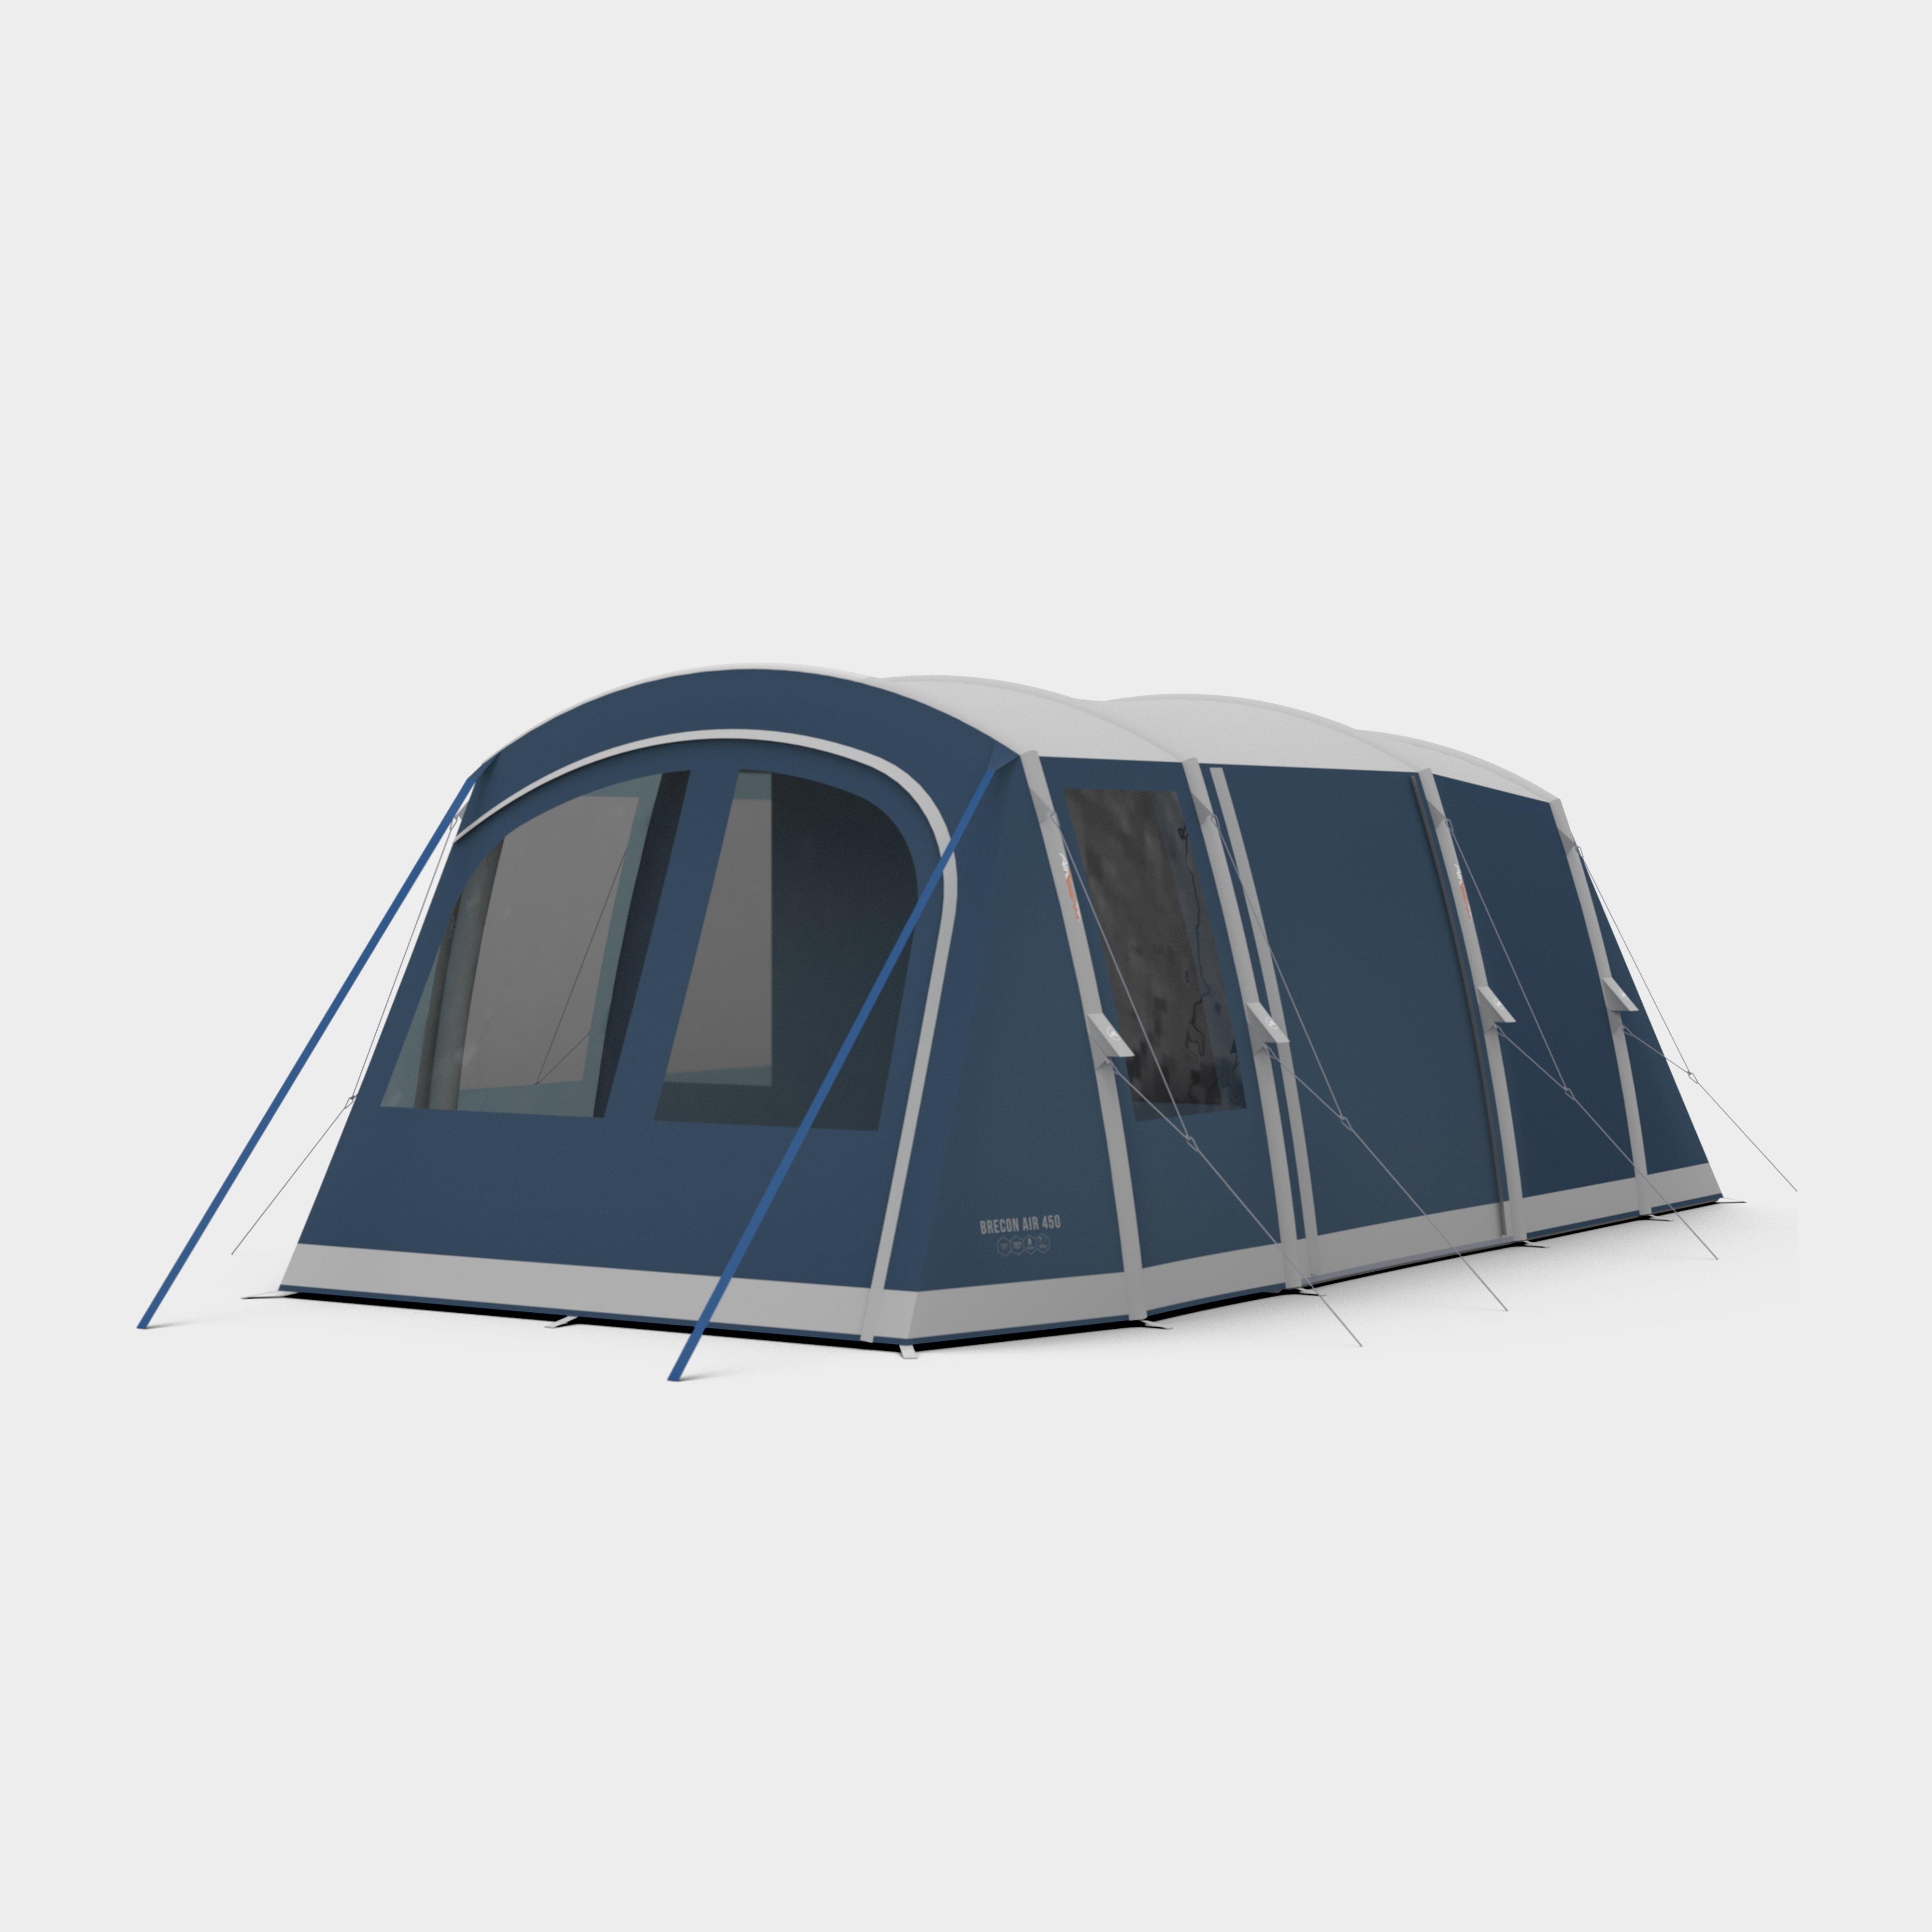  VANGO Brecon Air 450 National Trust Edition Air Tent, Navy